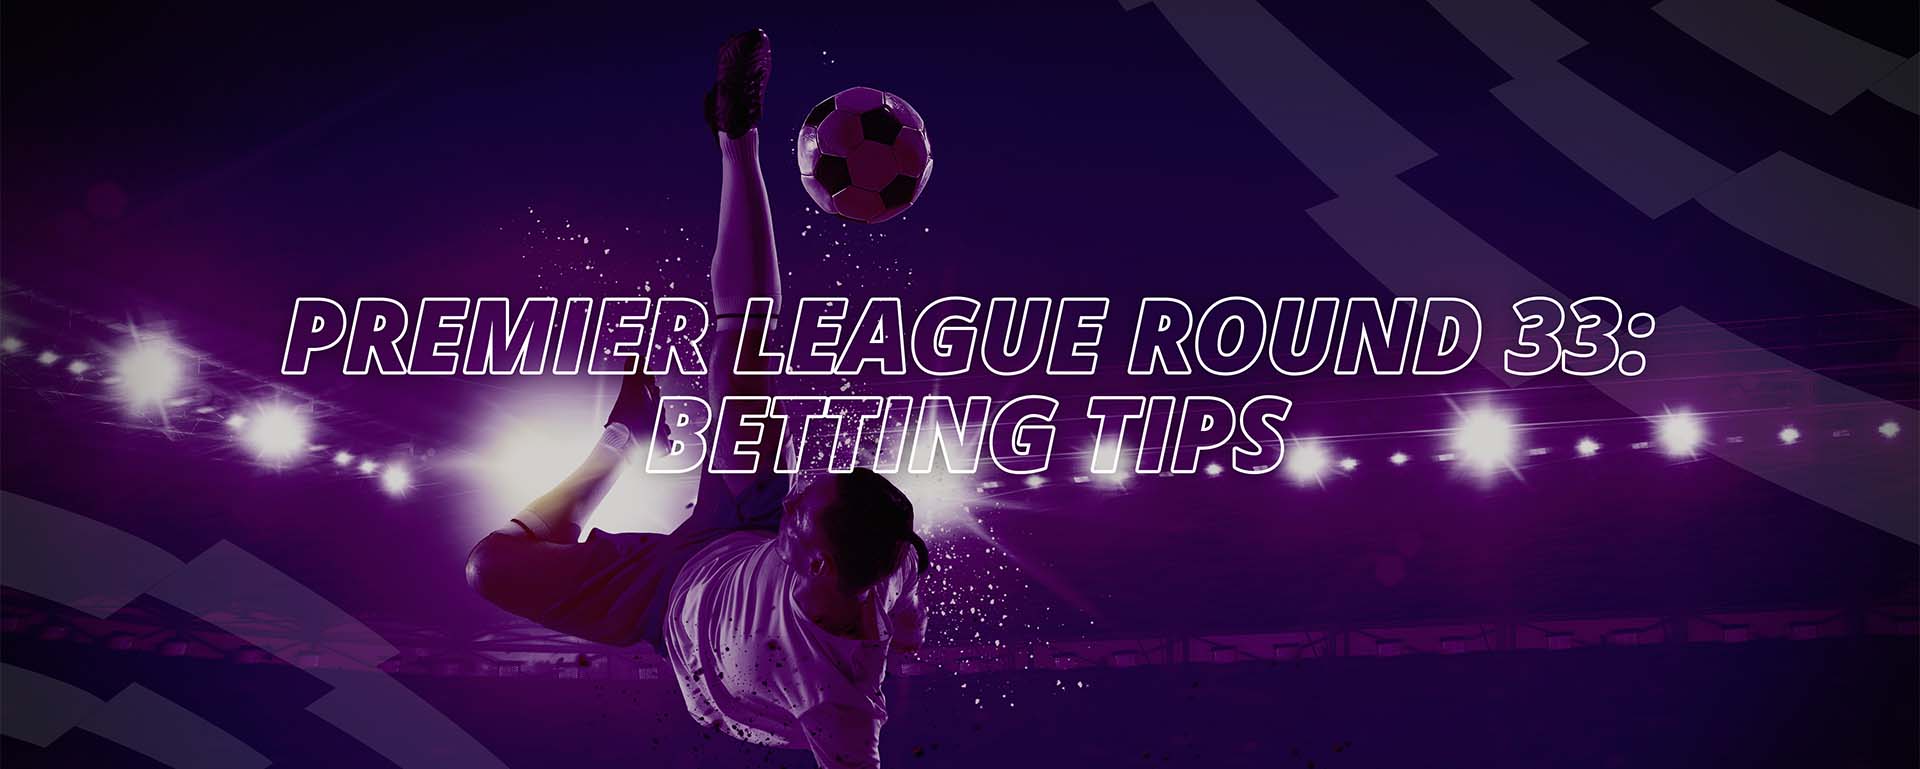 PREMIER LEAGUE ROUND 33: BETTING TIPS